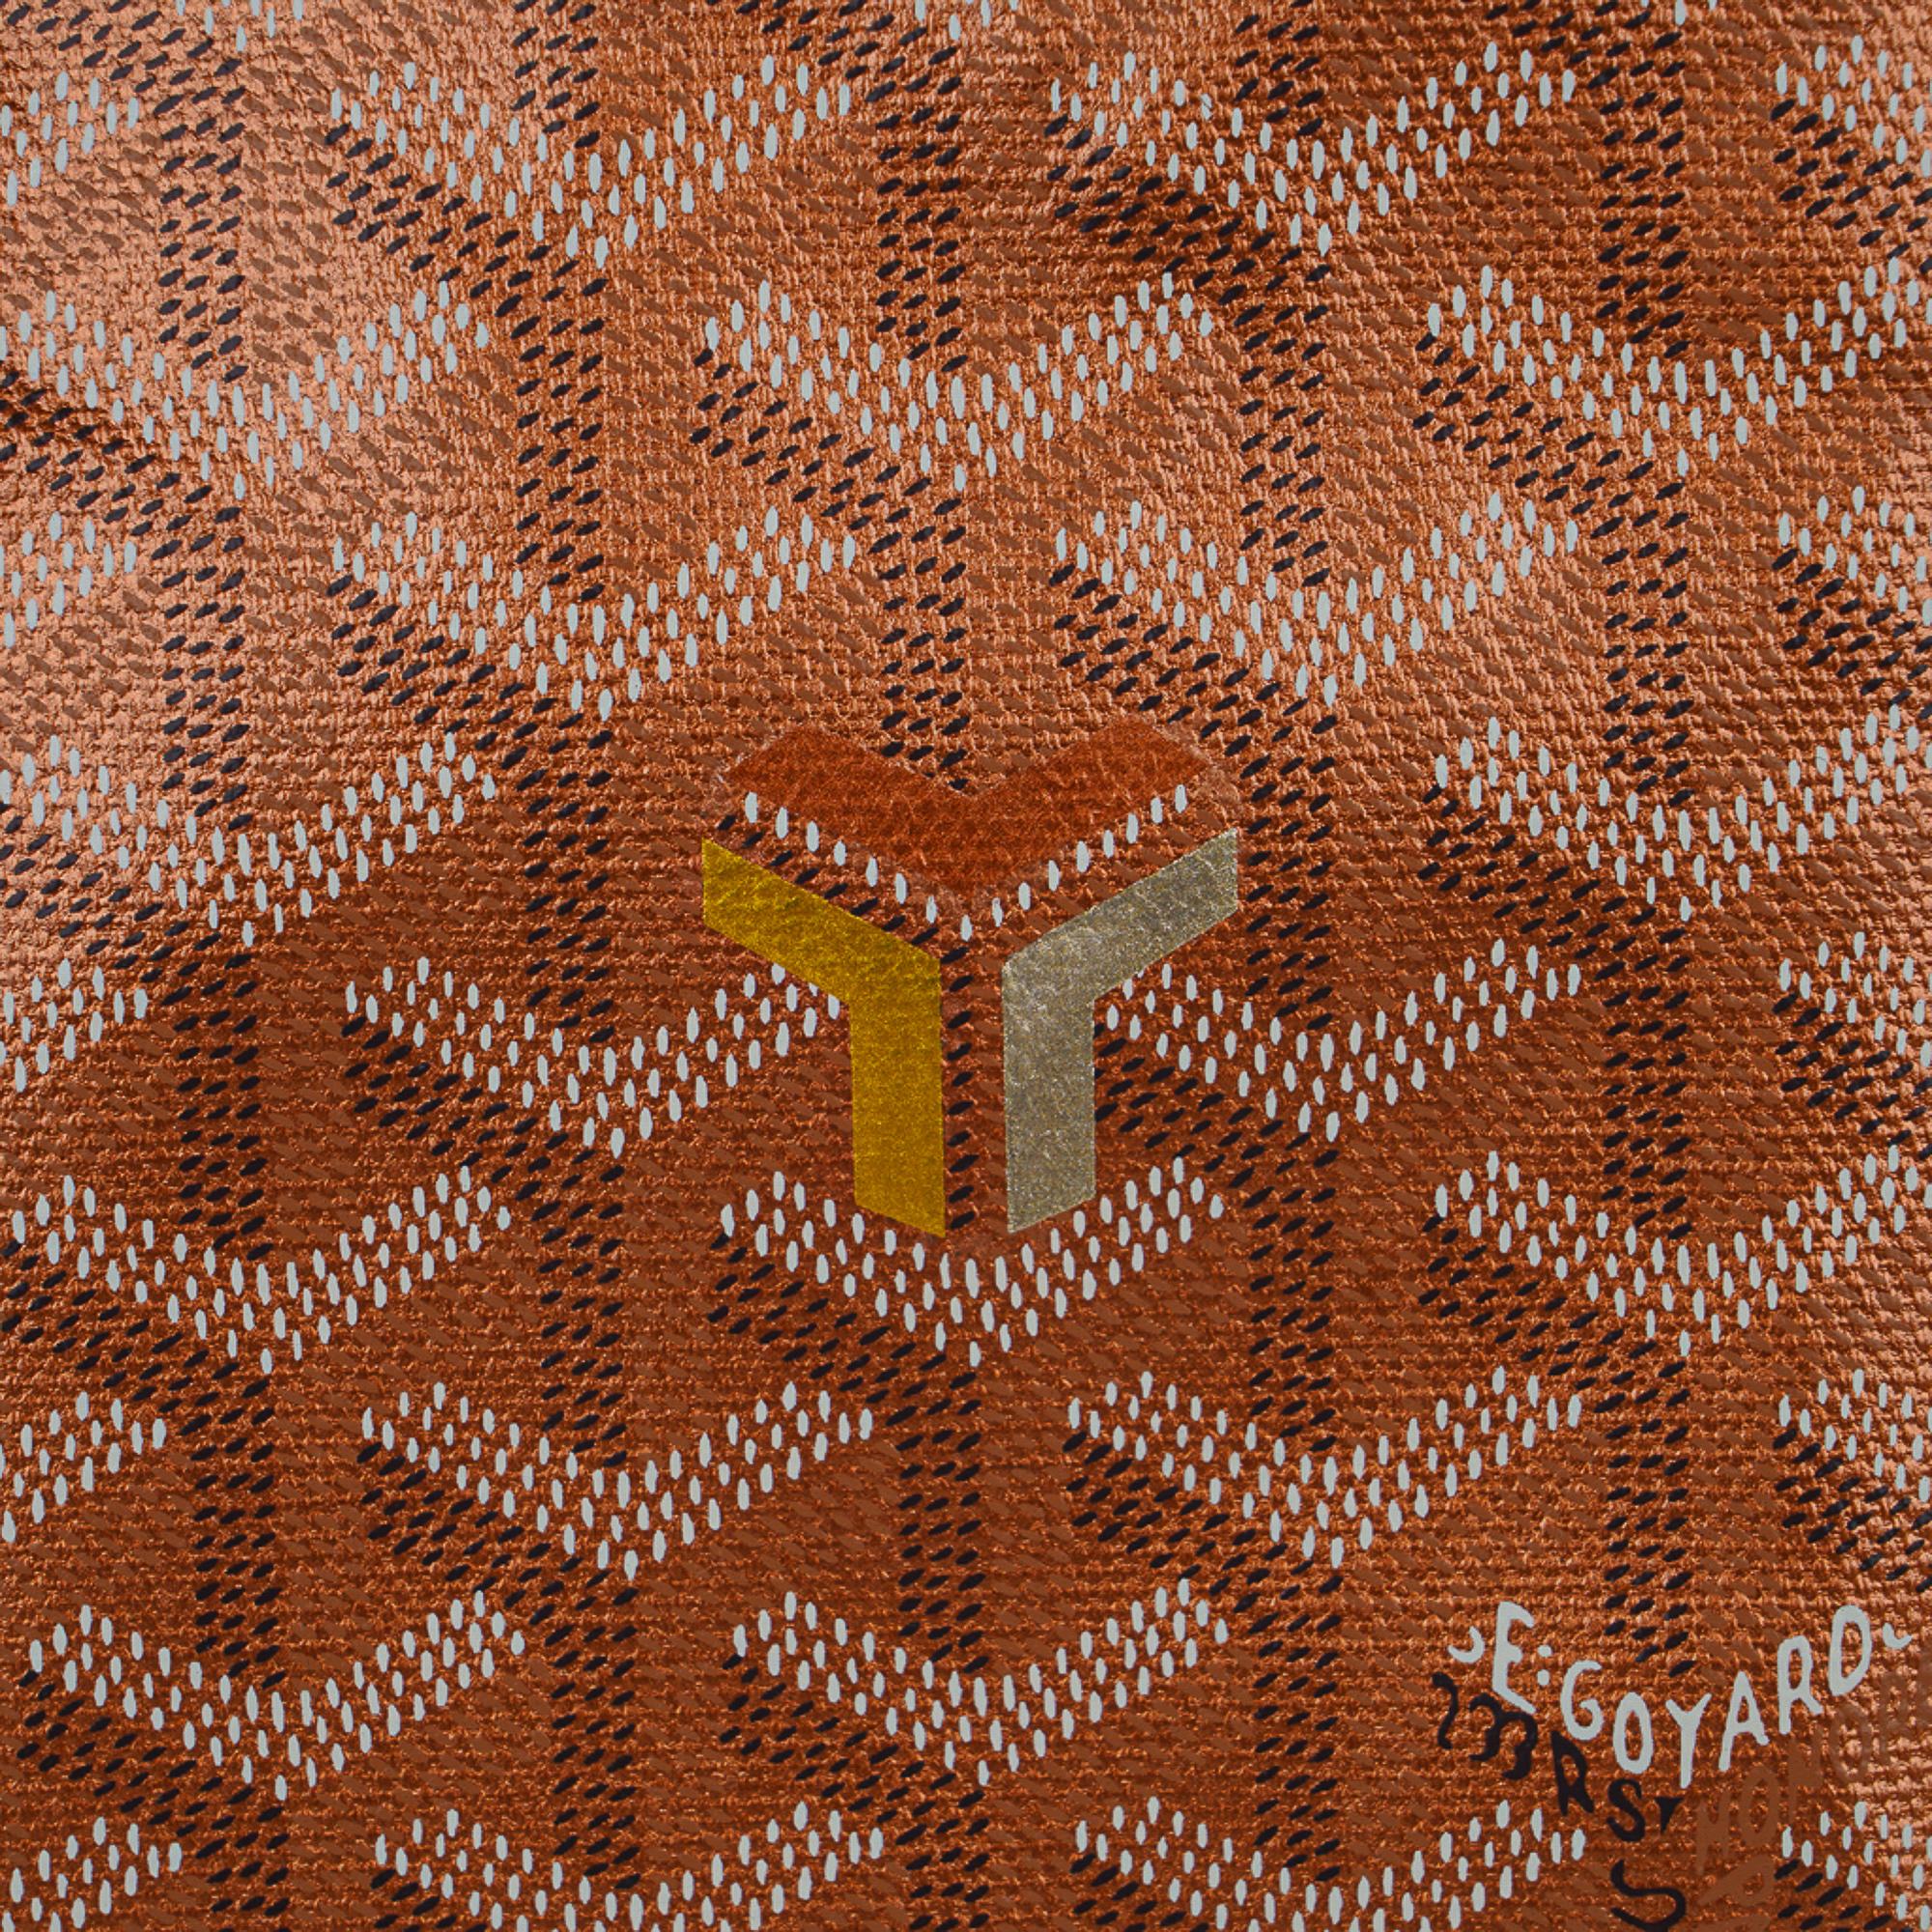 Mightychic offers a guaranteed authentic Goyard Saint Louis PM Limited Edition 2021 Bronze Metallic tote.
Highly sought after and rare, this fabulous, fun tote is the perfect go to!
Classic signature chevron print and calfskin leather.
Light weight